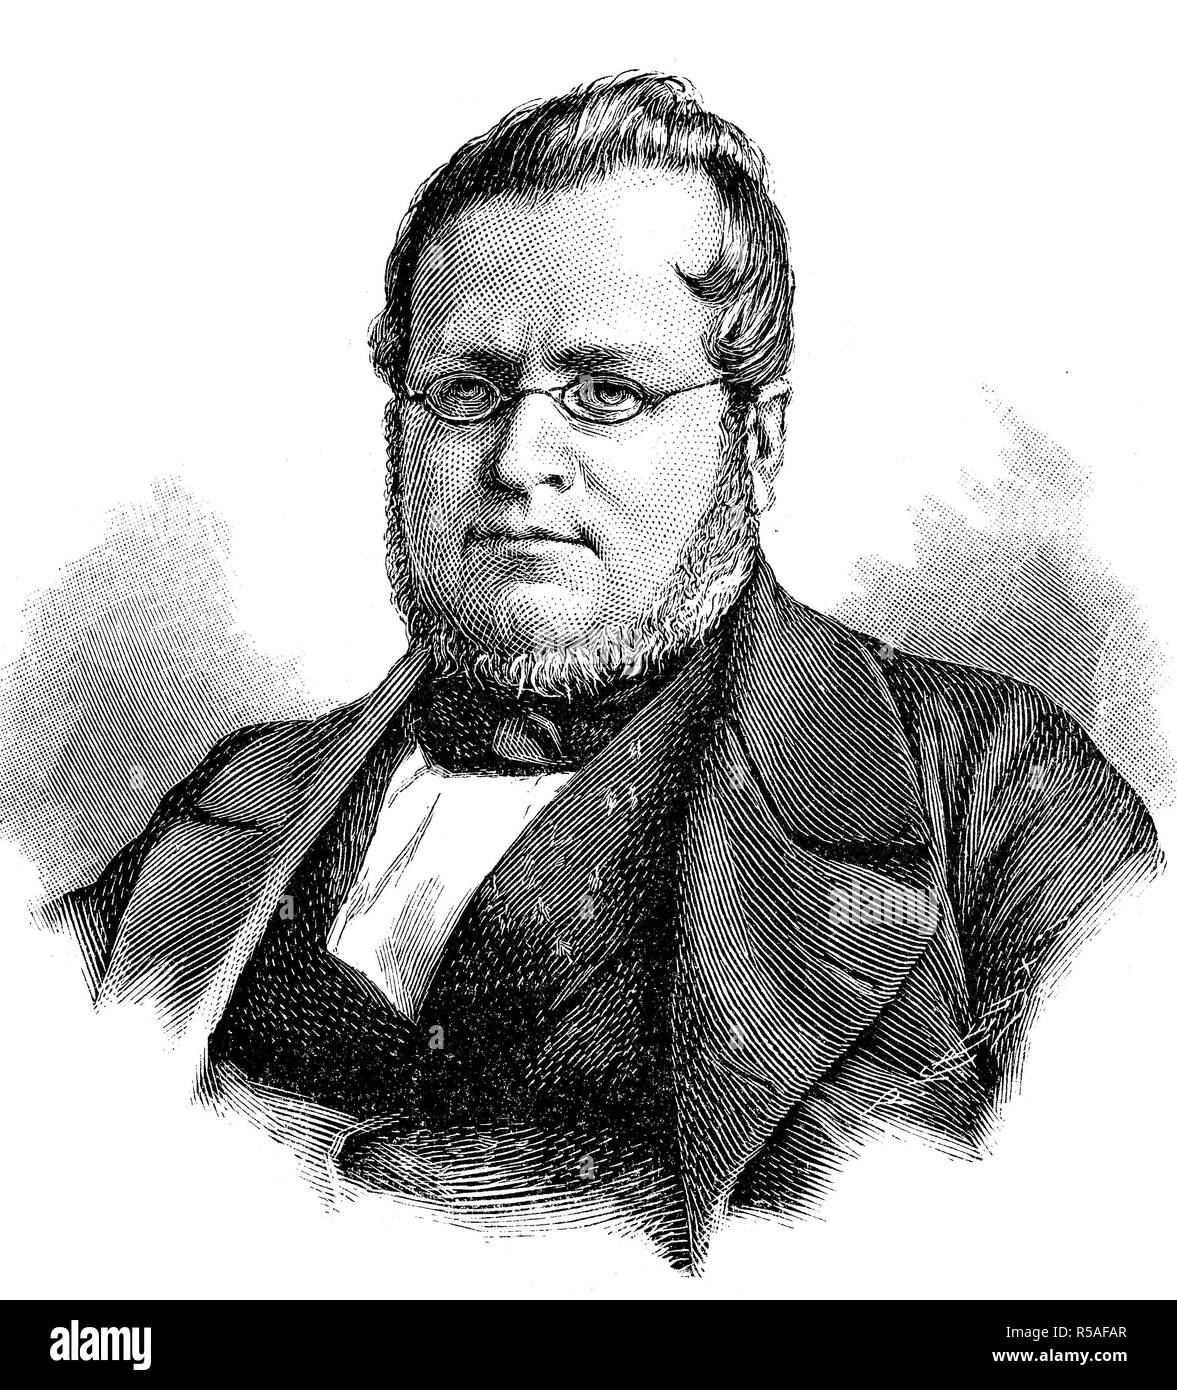 Camillo Benso Count of Cavour, August 10, 1810- June 6, 1861, Prime Minister of the Kingdom of Sardinia, woodcut, Italy Stock Photo